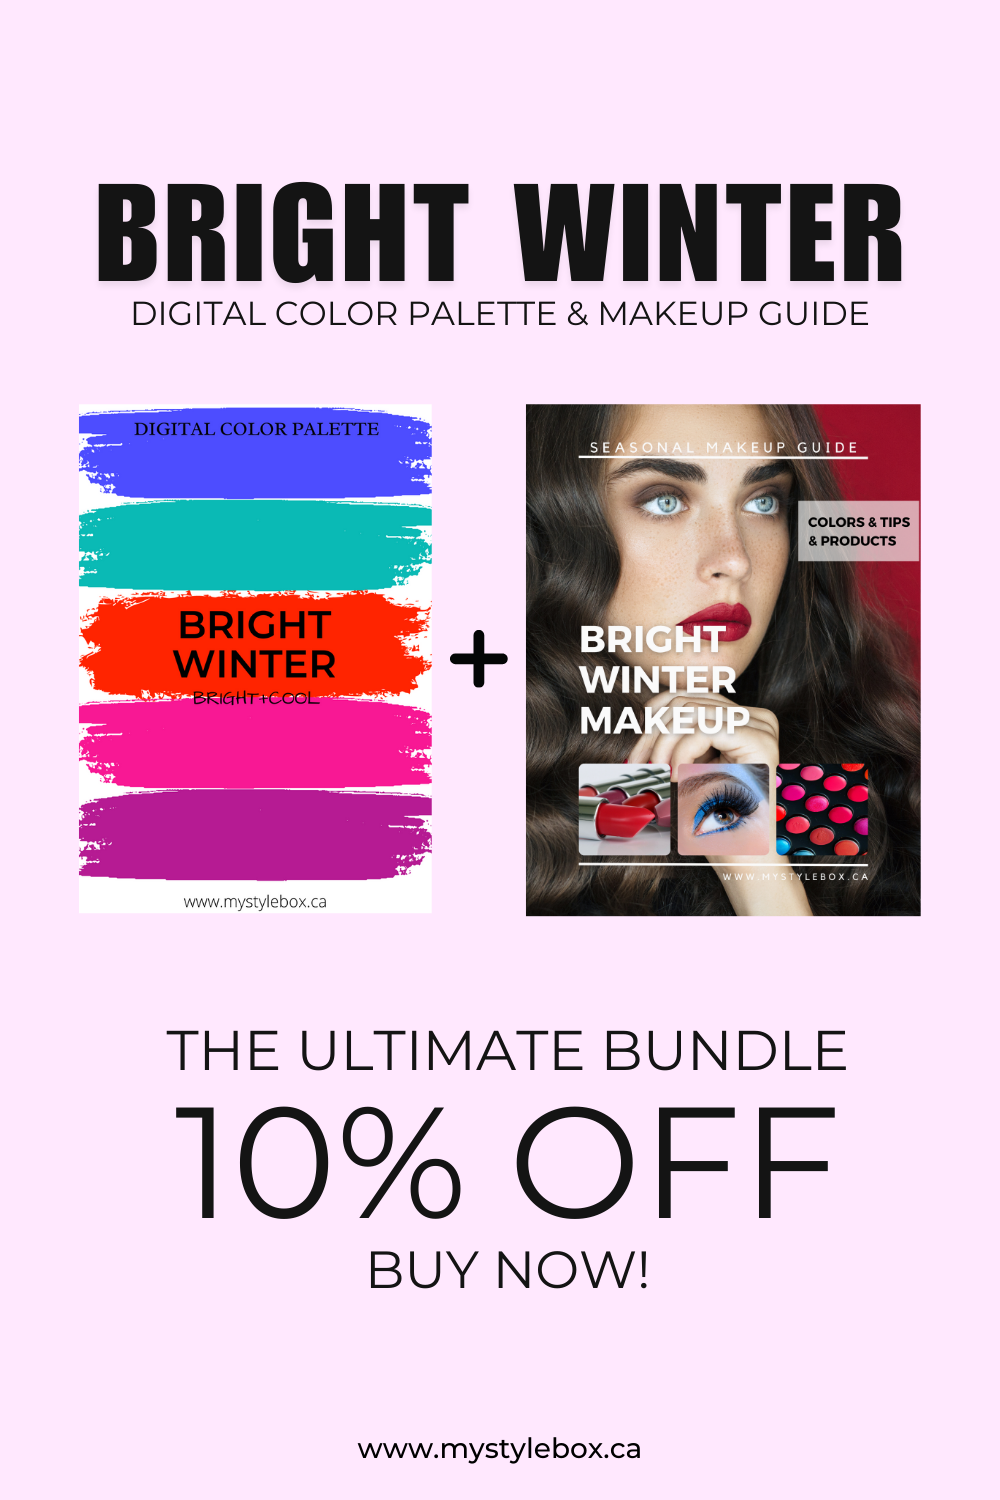 Bright Winter Digital Color Palette and Makeup Guide